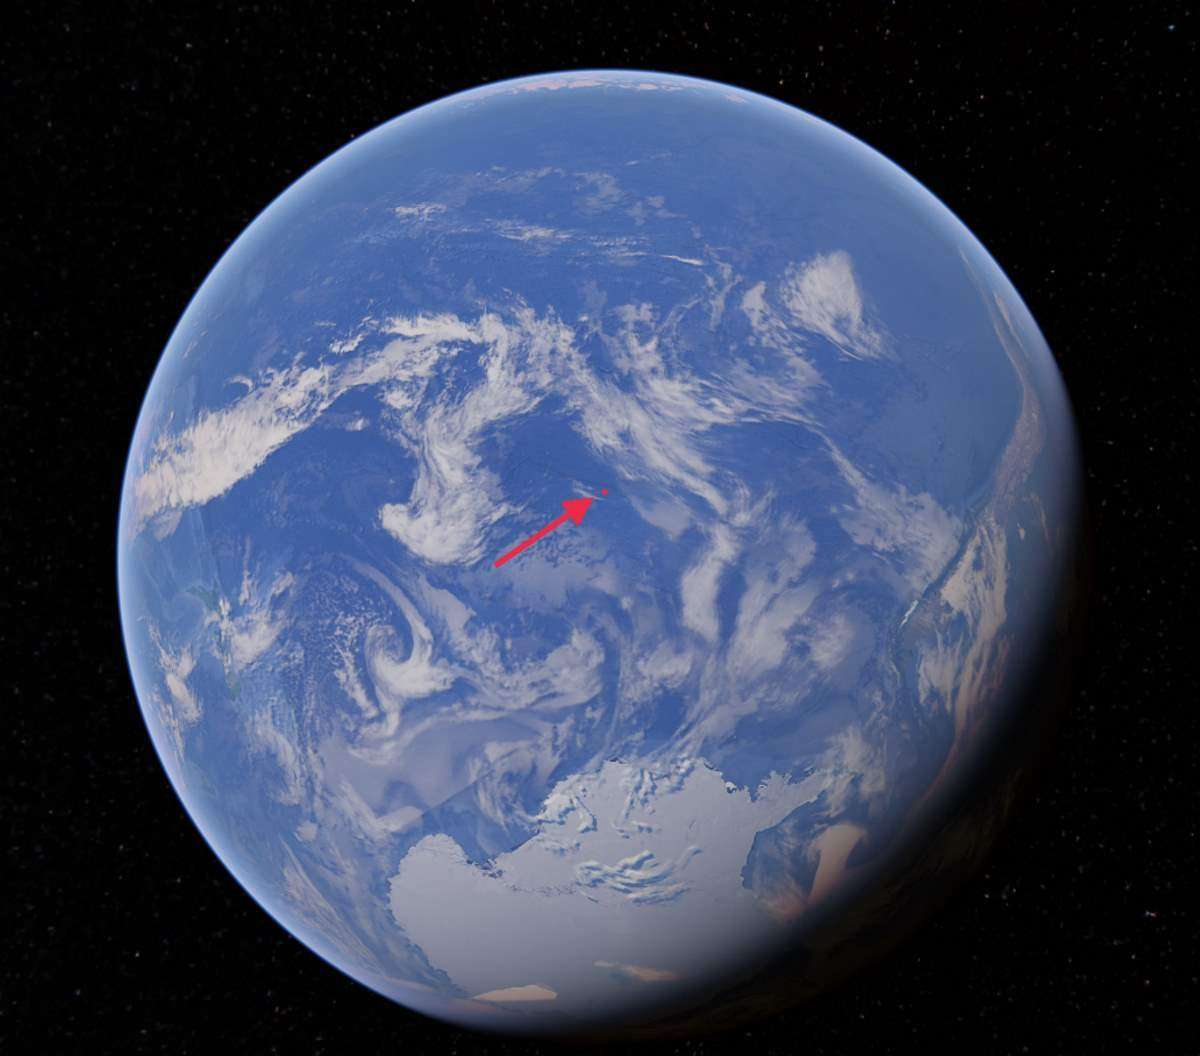 image for TIL There's a place in the Pacific Ocean called Point Nemo. It s so far from land, the nearest humans are often astronauts. The ISS orbits the Earth at a maximum of 258 miles (416km). Meanwhile the nearest inhabited landmass to Point Nemo is over 1,670 miles (2,700km) away.